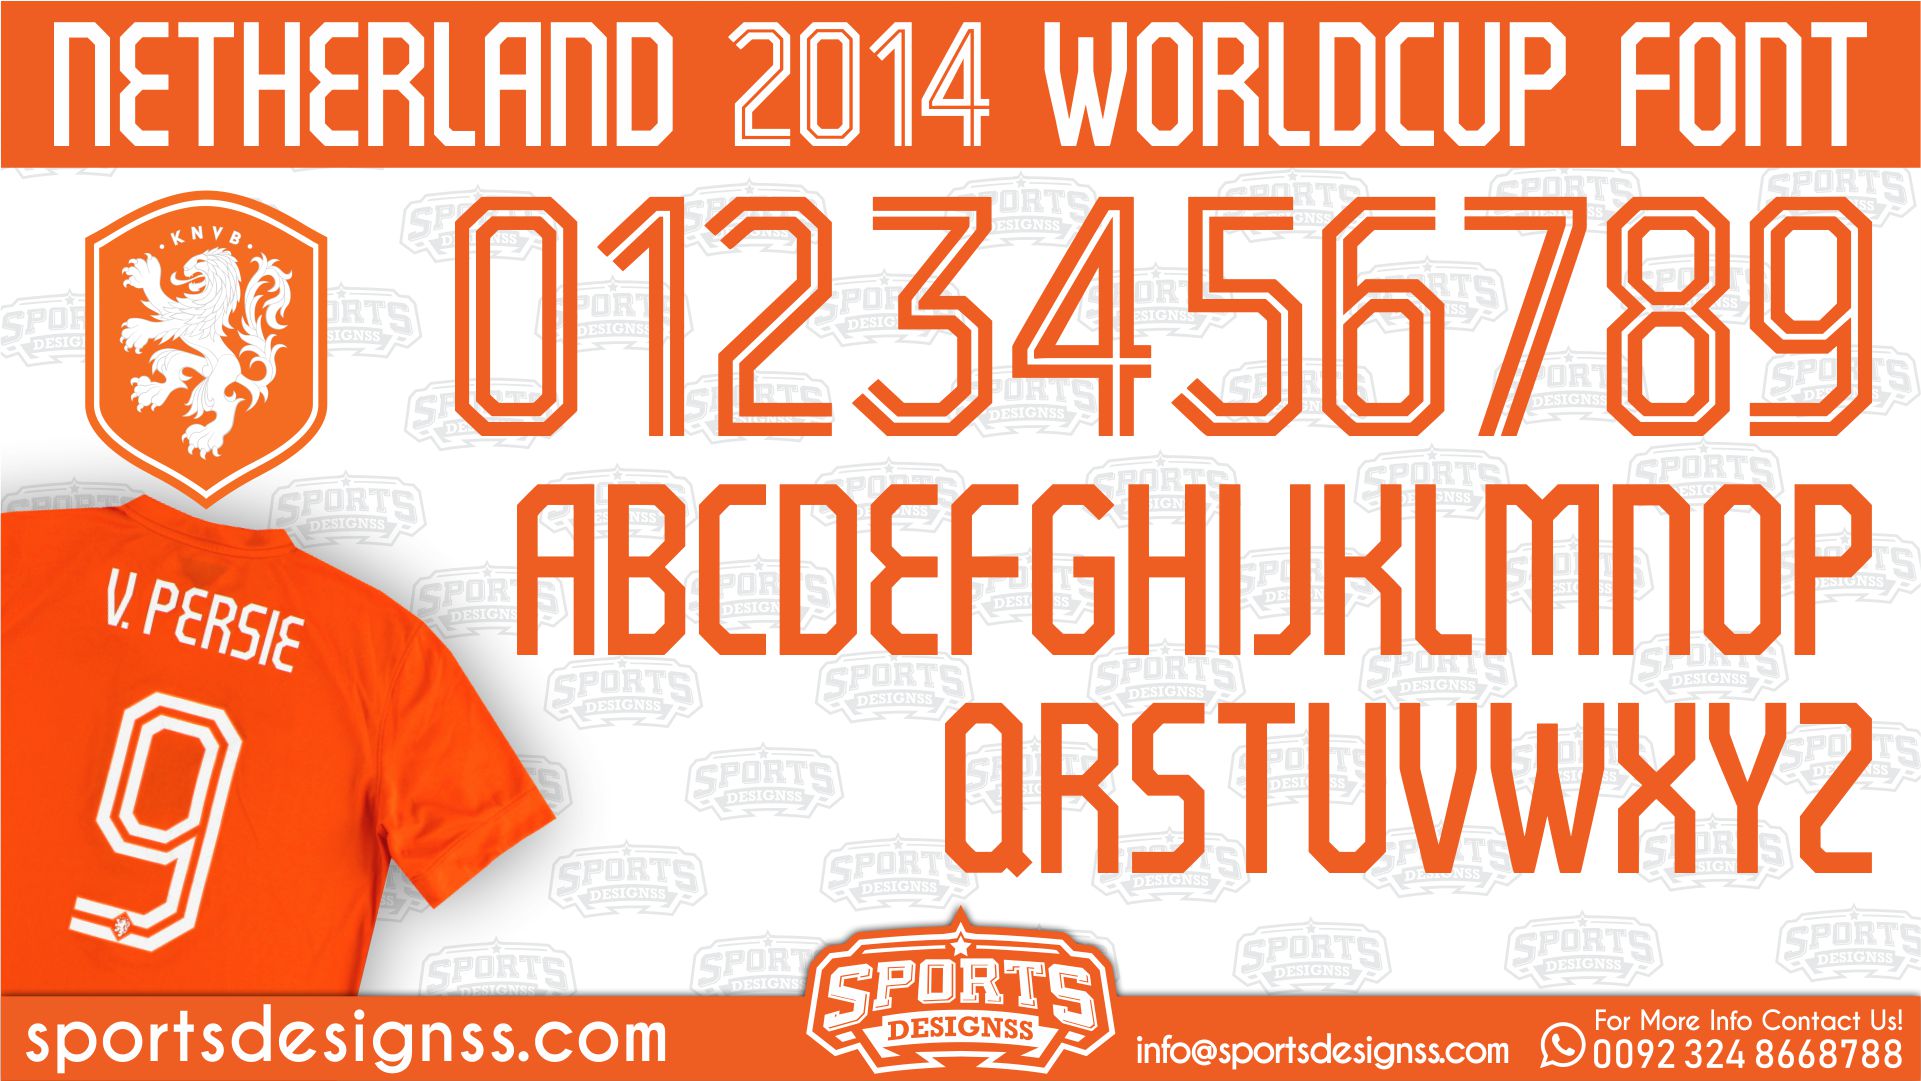 FREE DOWNLOAD: Netherland FC 2014 Football Font by Sports Designss,Netherland Football Font Free Download,FREE DOWNLOAD: Netherland FC 2014 Football Font by Sports Designss,FREE DOWNLOAD: Netherland FC 2014 Football Font,Netherland FC FontFree Download by Sports Designss_Download,Netherland FC Font Free Download by Sports Designss_Download, Netherland FC 2014 Football Font Free Download by Sports Designss,Netherland FC 2014 Font Free Download, Netherland FC 2014 Font, Netherland FC 2014 Font Free Download, Netherland FC New Font Free Download, EFL font, FA Font, EFL font Free Download, FA Font Free Download,Netherland FC 2014 Free Download,Netherland FC 2014 Font, 2014 football fonts free download, freefootballfont, sportsdesignss.com, mqasimali.com, Free Download Netherland FC 2014 Font,Netherland FC  WorldCup font, Netherland FC latest jersey font, Netherland FC new jersey font,nfl font,football jersey font ttf free download,free football fonts,premier league font,real madrid font,football kit font,football number font name,la liga jersey font,sublimation football jersey design,adidas font,PERSIB 2014 FONT Netherland FC 2014 Football Font Free Download,Netherland FC 2014 Font,Netherland FC New Font Free Download,Netherland FC font,Netherland FC font Free Download,Netherland FC 2014 font Free Download,freefootballfont,sportsdesignss.com,mqasimali.com,Free Download Netherland FC 2014 Font,Netherland FC font,Netherland FC latest jersey font,Netherland FC new jersey font,Netherland FC 2014 jersey font,Download Netherland FC 2014 Font Free,Download Netherland FC 2014 Font FREE,Netherland FC 2014 typeface,Download Netherland FC 2014 Football Font For free,Netherland FC kit font download,new Netherland FC font,Netherland FC 2014 FONT (OTF),Netherland FC font free download,Netherland FC font 2014 free download,Netherland FC fc font,nike football font free download,england football font free download,psg font 2014 free download,Saudi Pro League, AFC Champions League, King